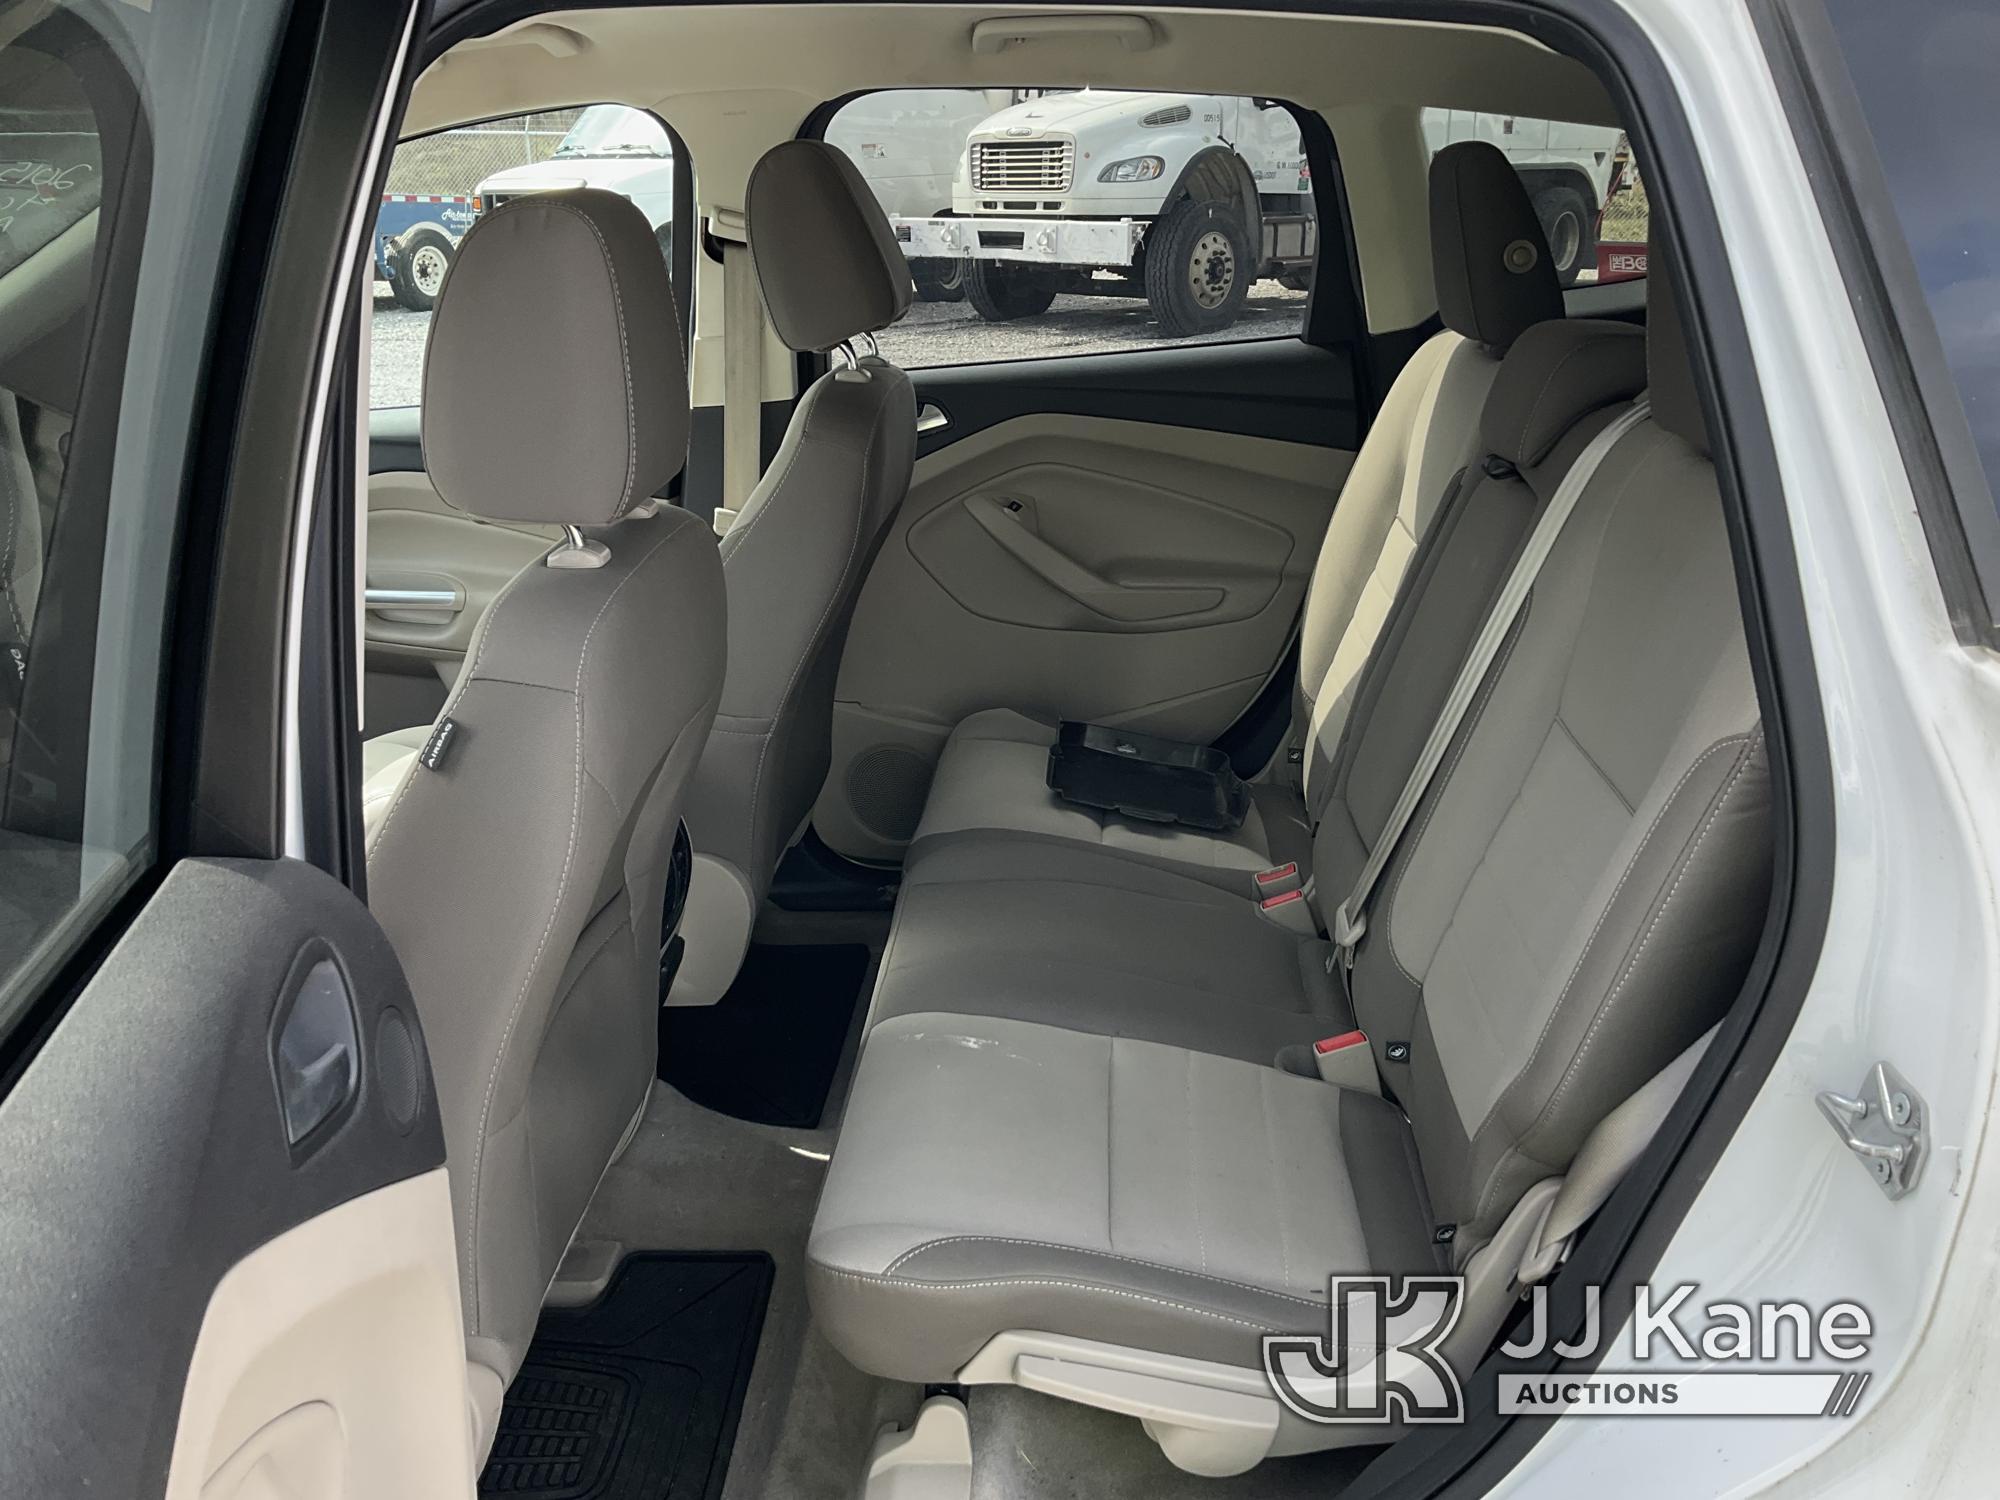 (Verona, KY) 2015 Ford Escape 4x4 4-Door Sport Utility Vehicle Runs & Moves ) (Check Engine Light On